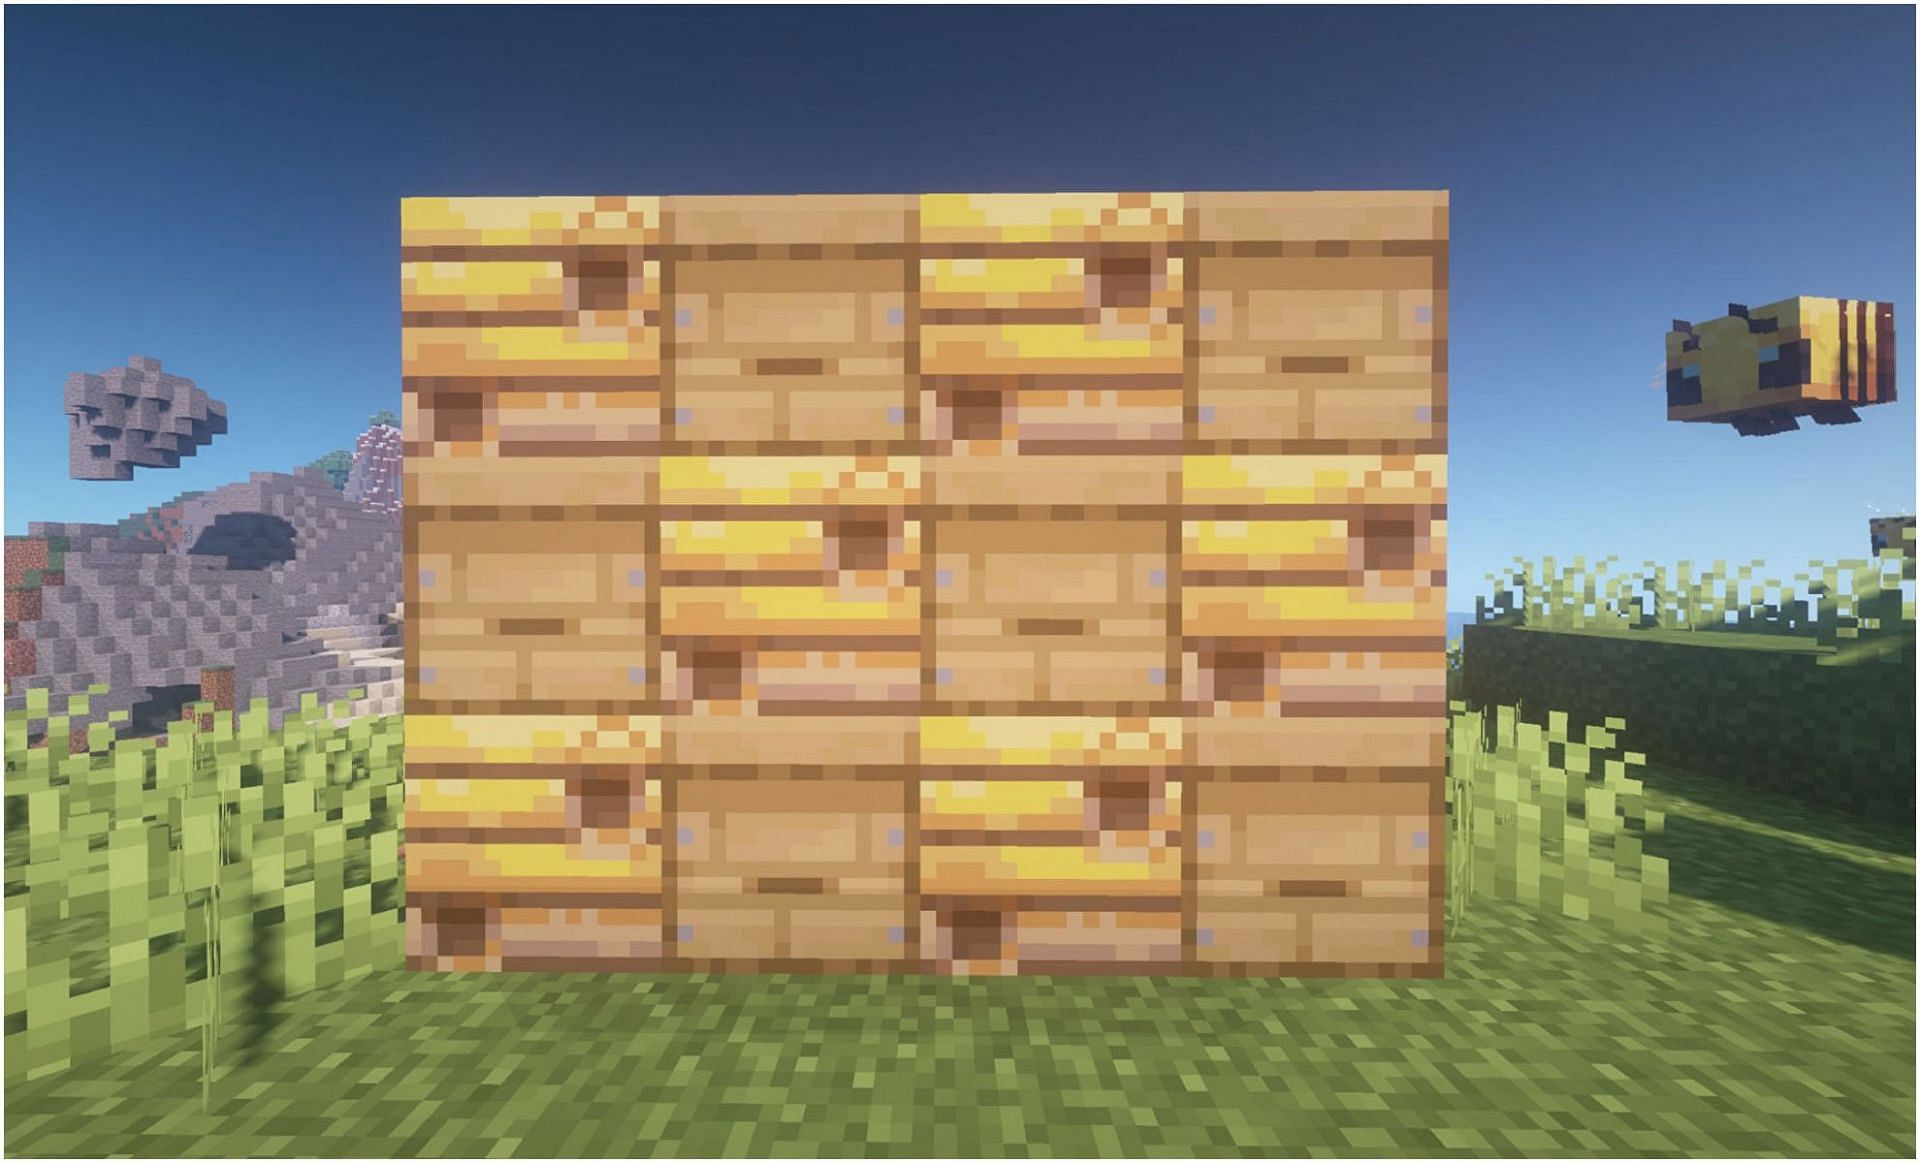 Both beehives and bee nests serve the same purpose (Image via Minecraft)